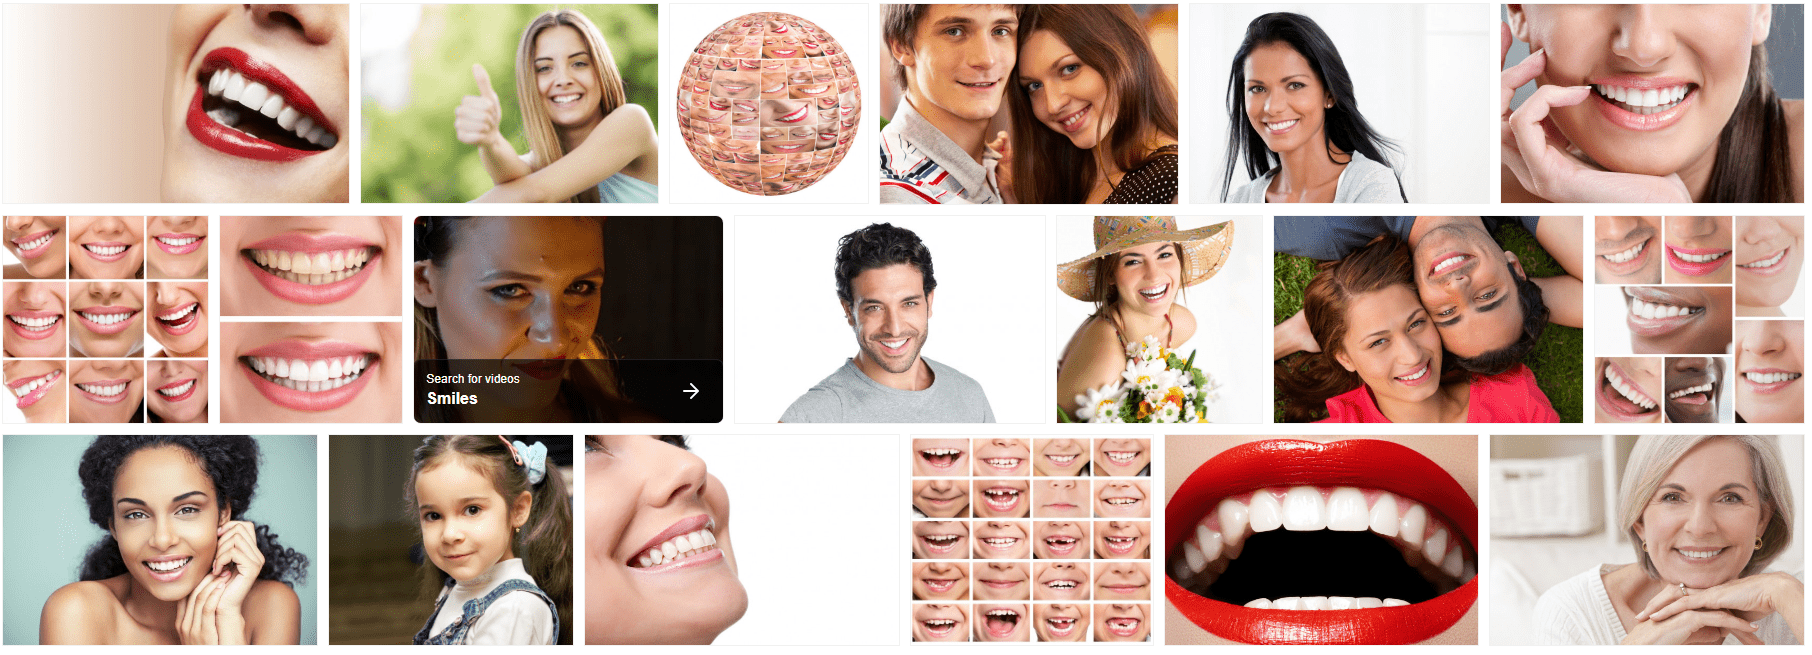 Dental Marketing Images To Stand Out